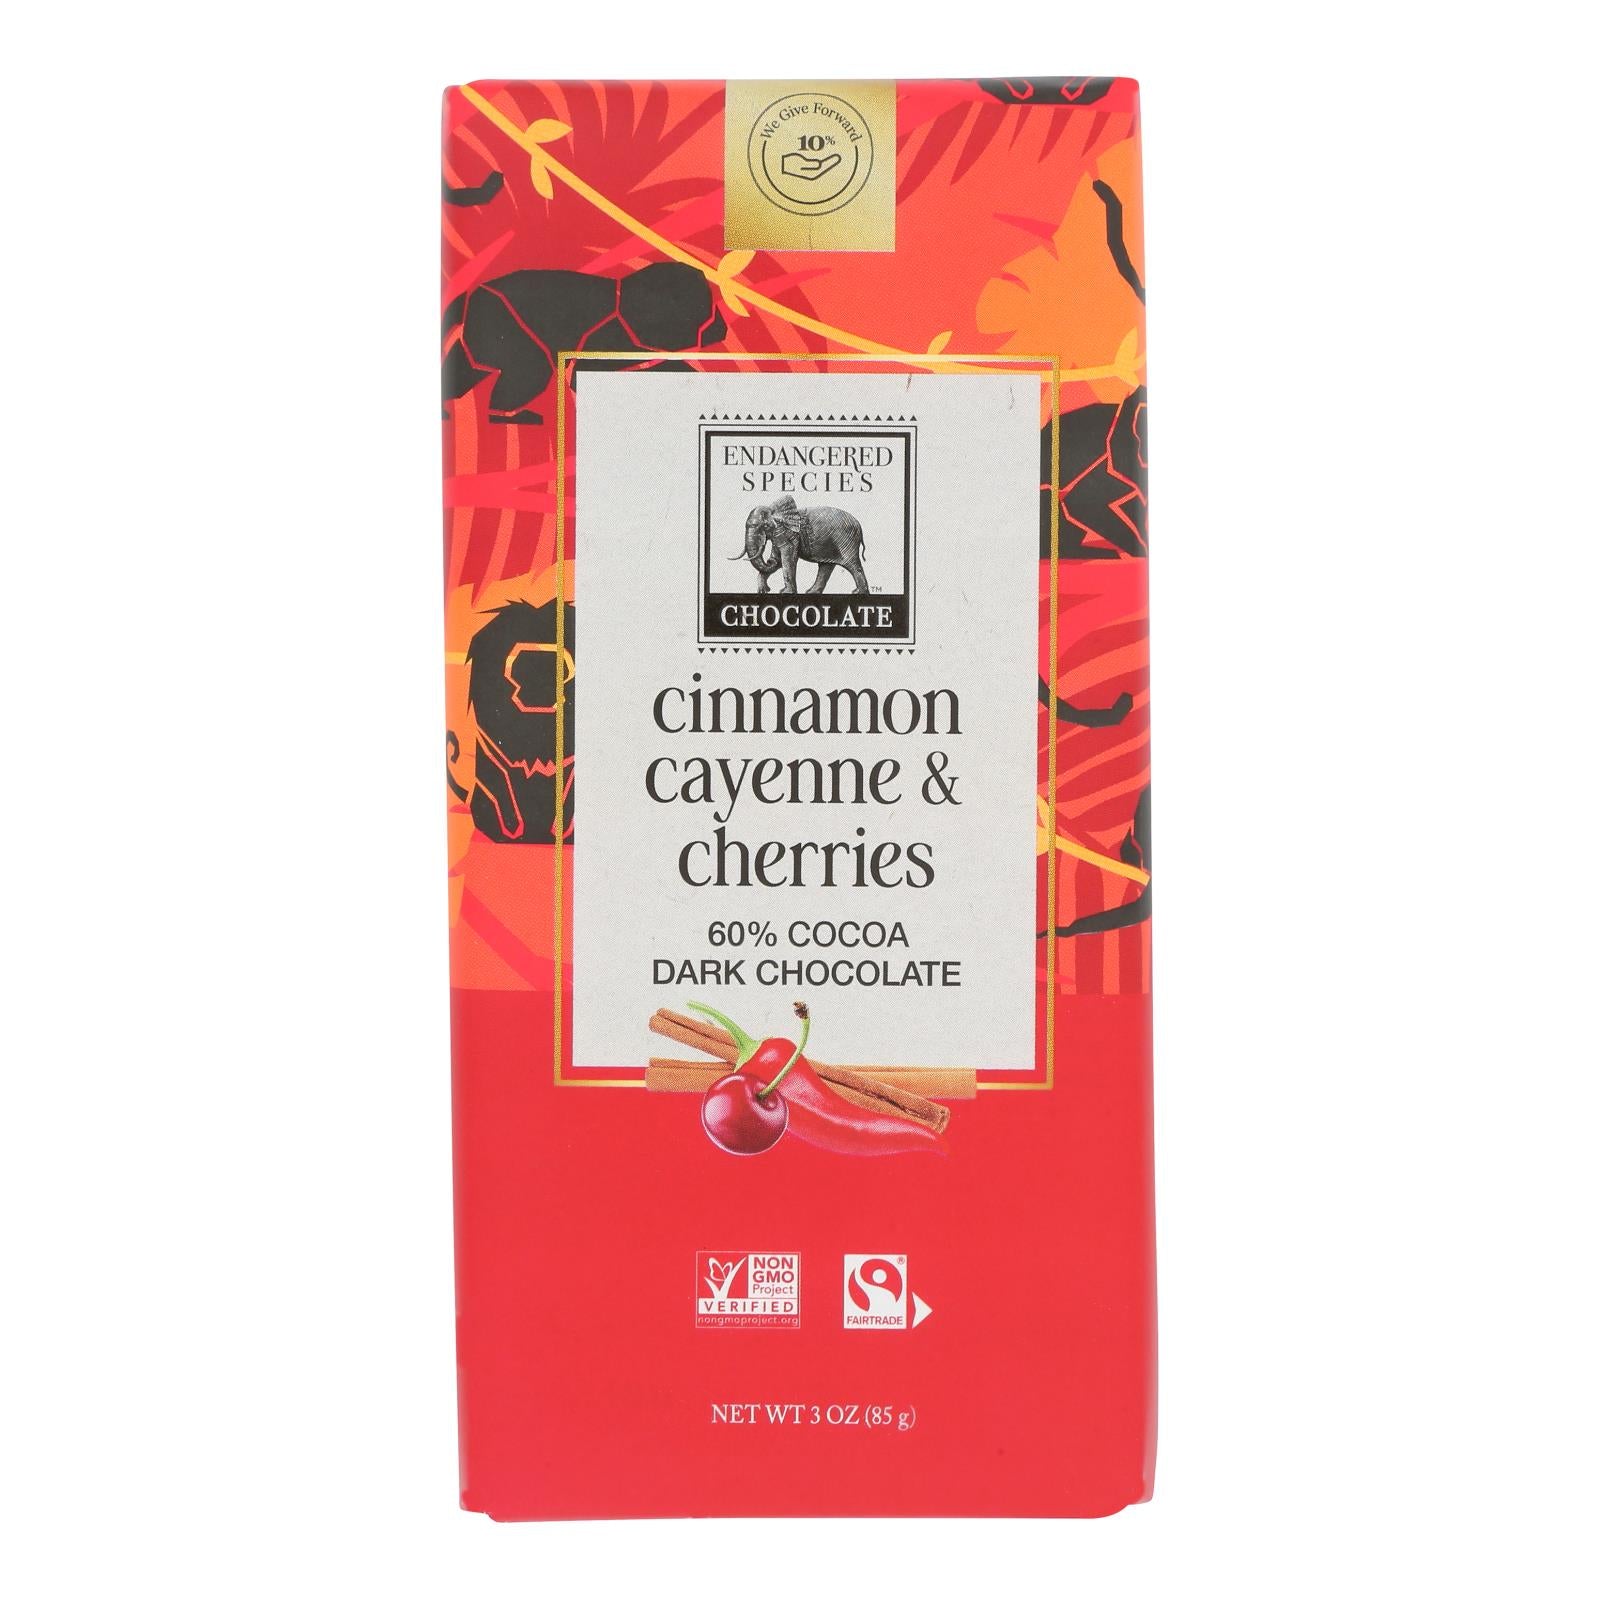 Endangered Species Natural Chocolate Bars - Dark Chocolate - 60 Percent Cocoa - Cinnamon Cayenne and Cherries - 3 oz Bars - Case of 12